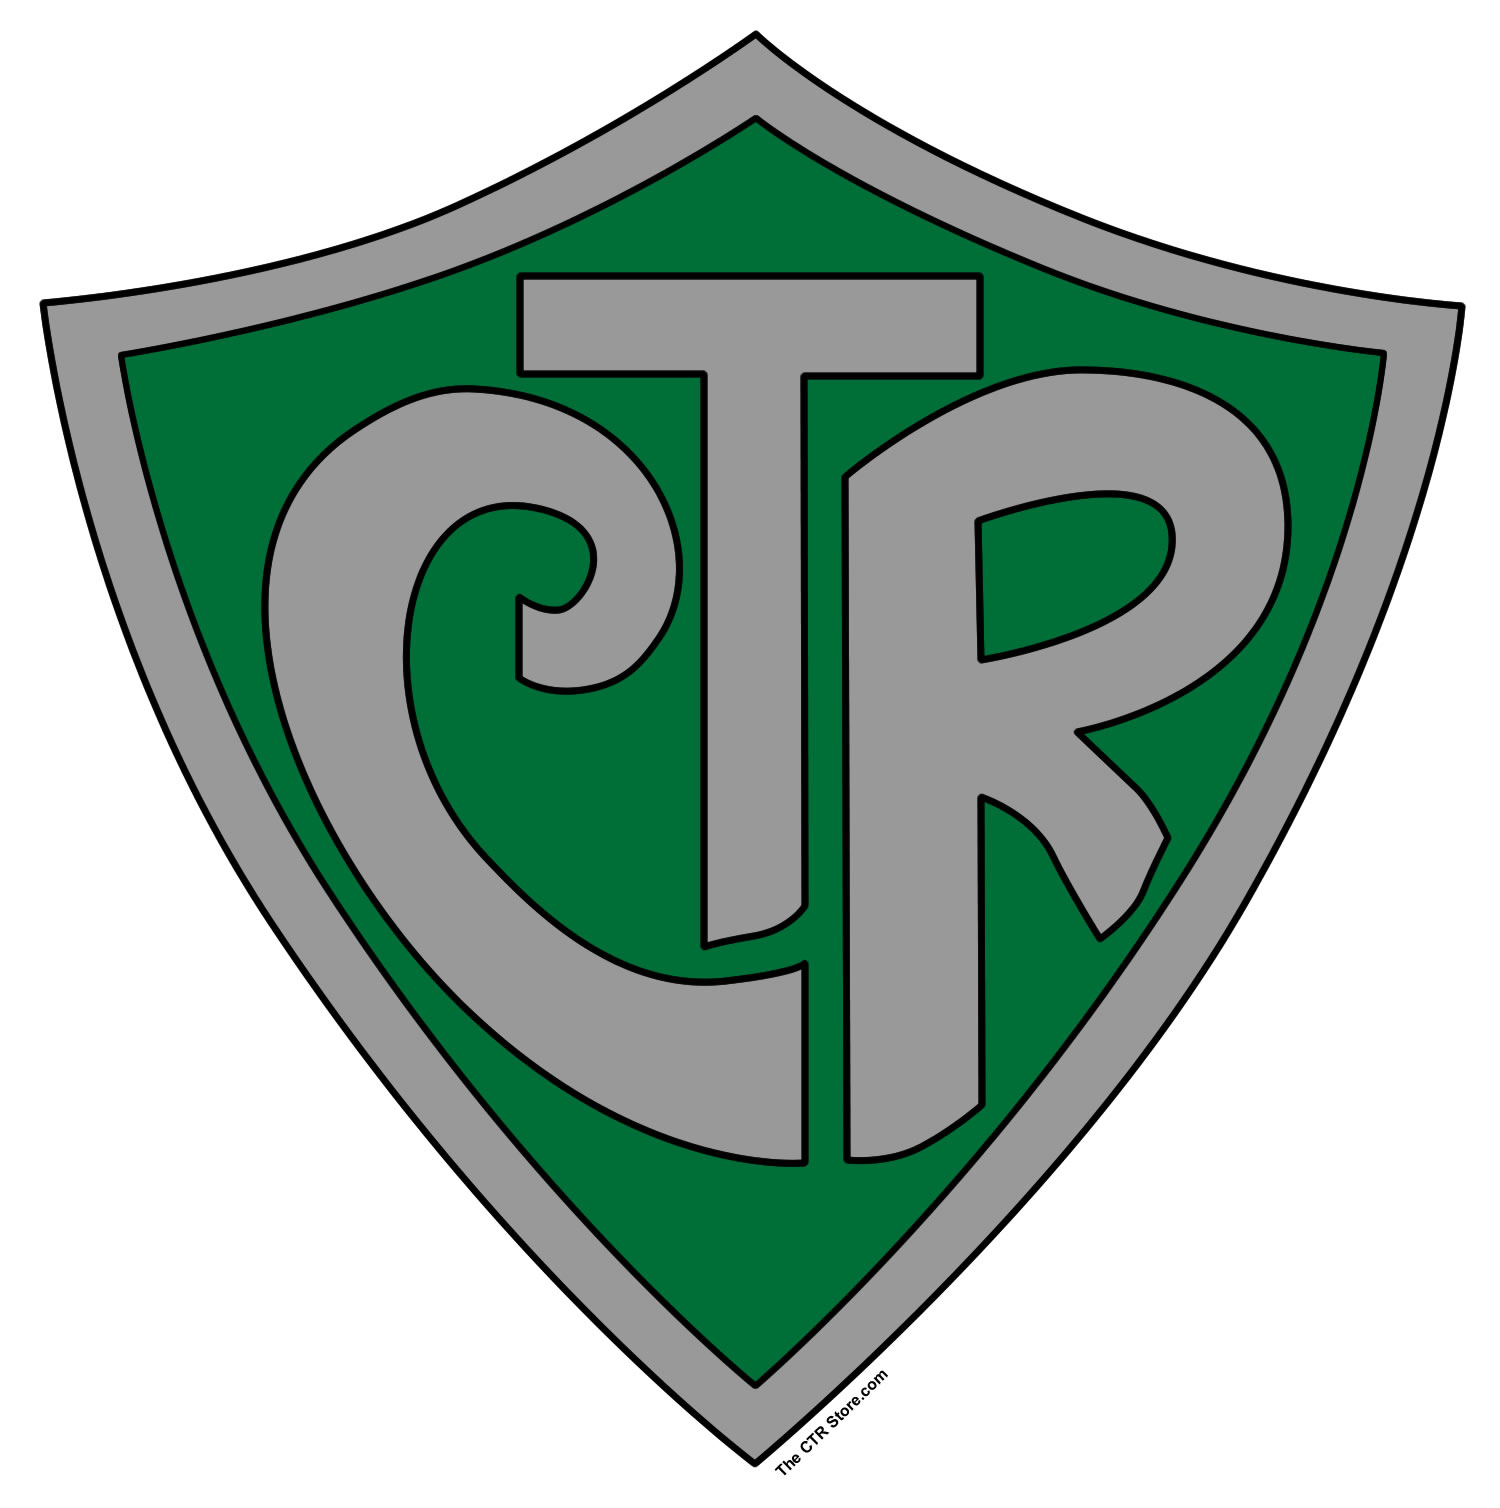 Ctr Shield Coloring Page Jpg